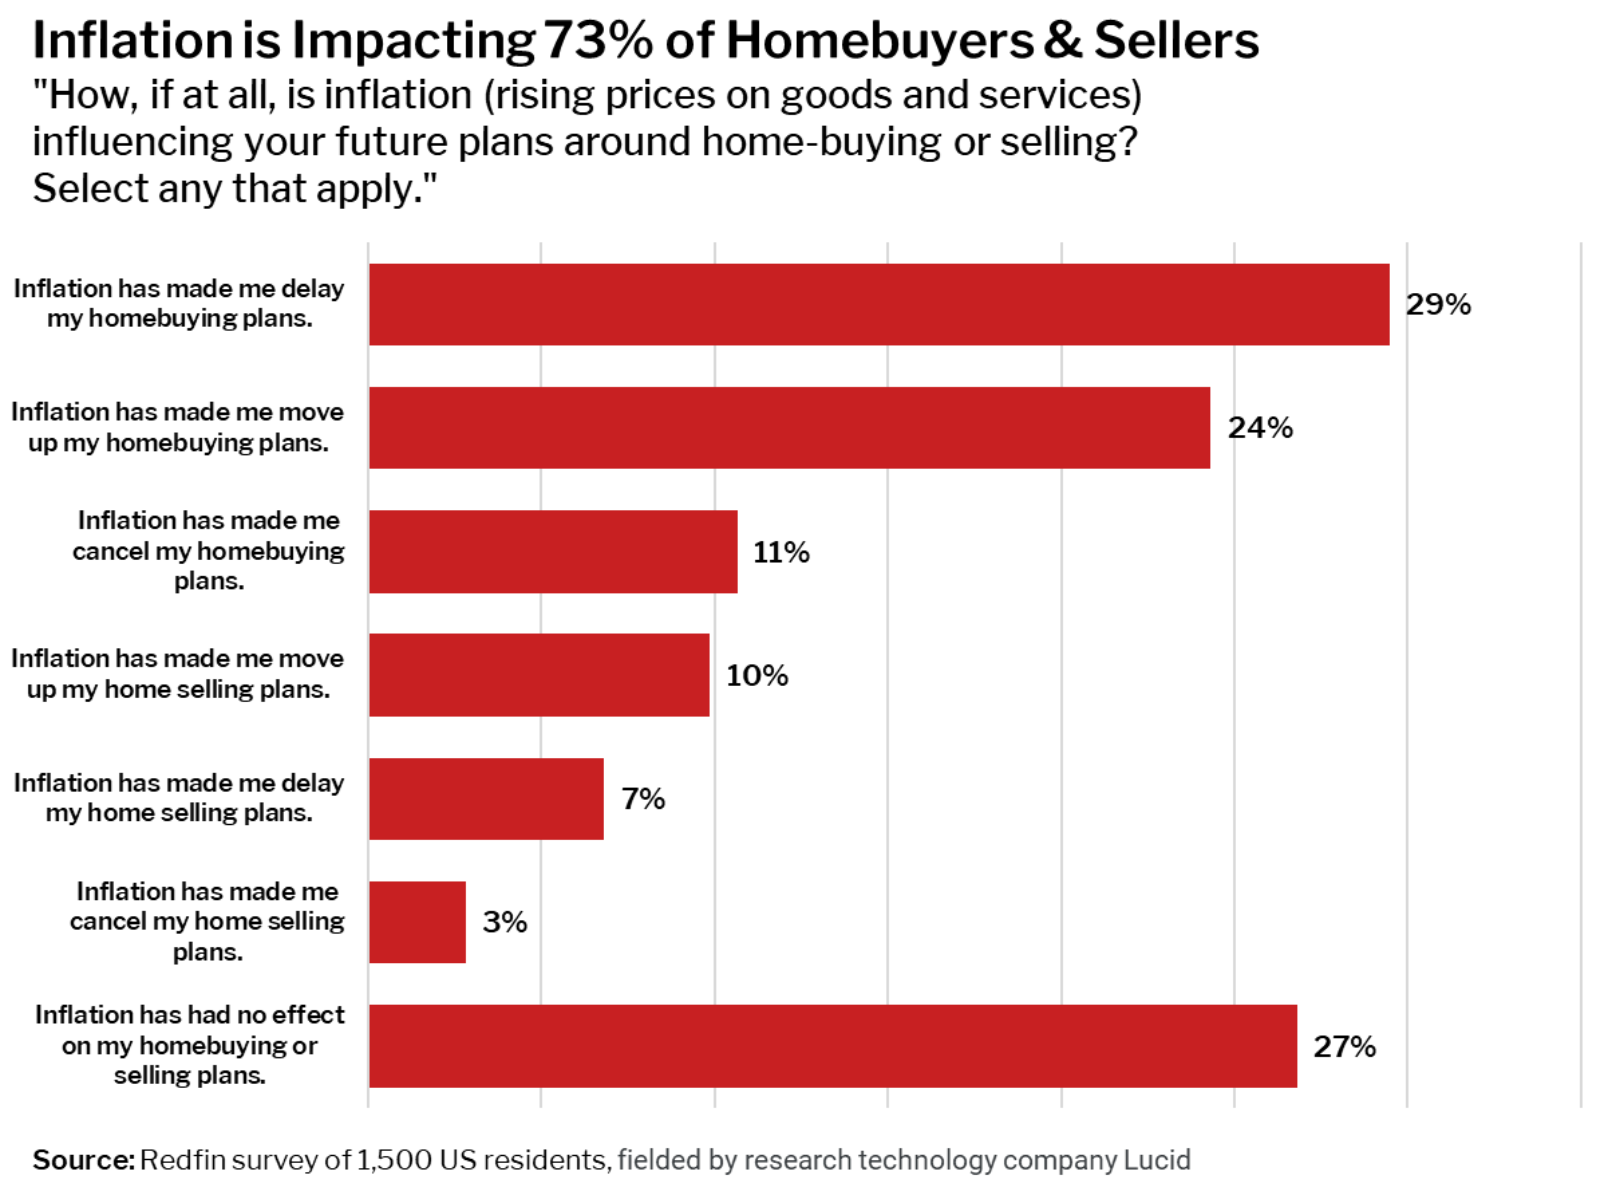 A bar chart showing the various ways inflation is impacting home buyers and sellers.